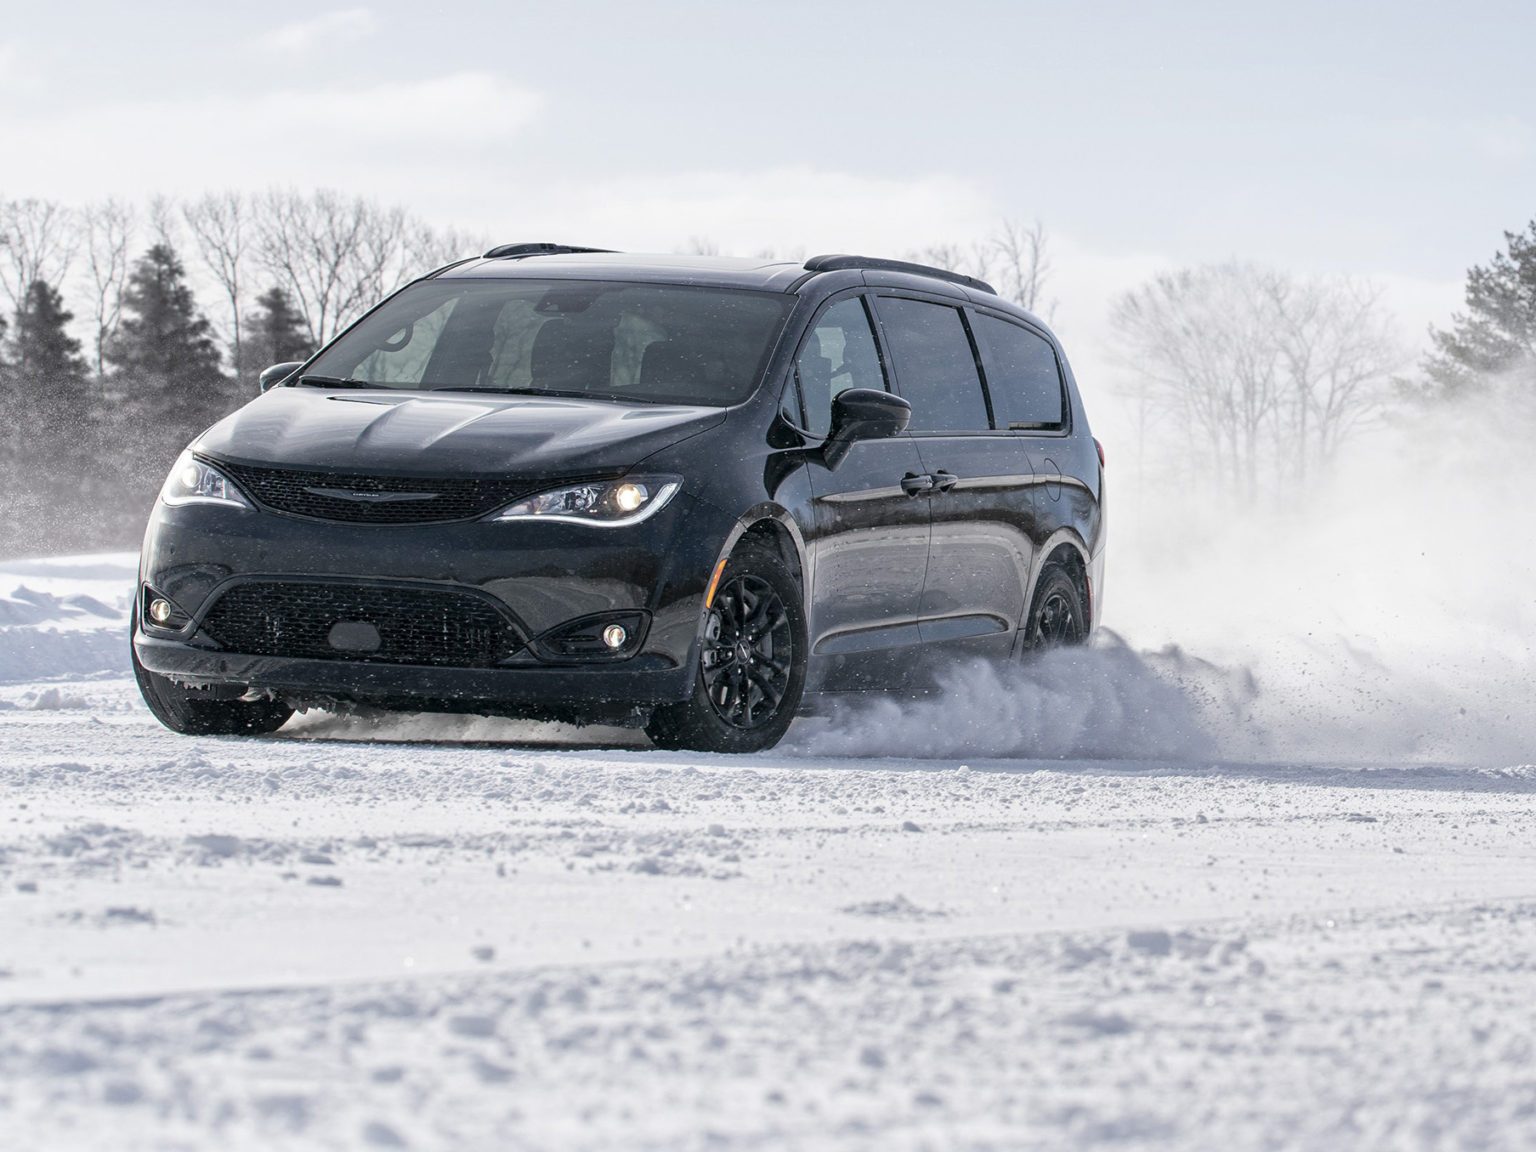 Toyota is no longer the only minivan maker to offer all-wheel drive.